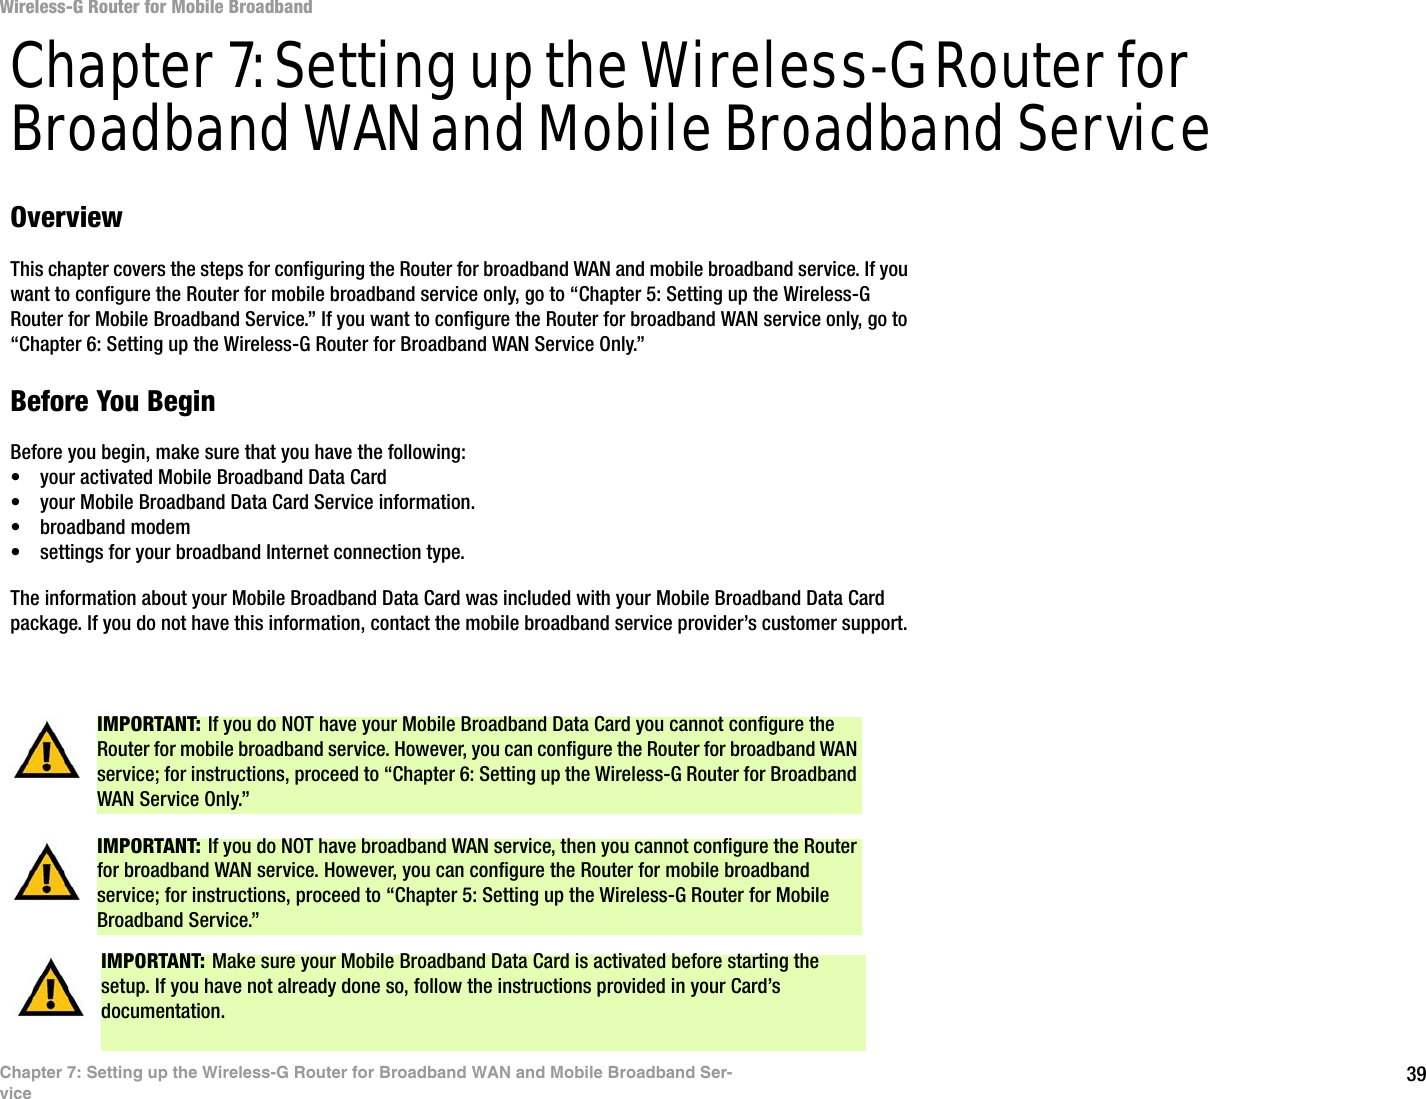 39Chapter 7: Setting up the Wireless-G Router for Broadband WAN and Mobile Broadband Ser-viceWireless-G Router for Mobile BroadbandChapter 7: Setting up the Wireless-G Router for Broadband WAN and Mobile Broadband ServiceOverviewThis chapter covers the steps for configuring the Router for broadband WAN and mobile broadband service. If you want to configure the Router for mobile broadband service only, go to “Chapter 5: Setting up the Wireless-G Router for Mobile Broadband Service.” If you want to configure the Router for broadband WAN service only, go to “Chapter 6: Setting up the Wireless-G Router for Broadband WAN Service Only.” Before You BeginBefore you begin, make sure that you have the following:• your activated Mobile Broadband Data Card• your Mobile Broadband Data Card Service information.• broadband modem• settings for your broadband Internet connection type.The information about your Mobile Broadband Data Card was included with your Mobile Broadband Data Card package. If you do not have this information, contact the mobile broadband service provider’s customer support.IMPORTANT: If you do NOT have your Mobile Broadband Data Card you cannot configure the Router for mobile broadband service. However, you can configure the Router for broadband WAN service; for instructions, proceed to “Chapter 6: Setting up the Wireless-G Router for Broadband WAN Service Only.” IMPORTANT: If you do NOT have broadband WAN service, then you cannot configure the Router for broadband WAN service. However, you can configure the Router for mobile broadband service; for instructions, proceed to “Chapter 5: Setting up the Wireless-G Router for Mobile Broadband Service.” IMPORTANT: Make sure your Mobile Broadband Data Card is activated before starting the setup. If you have not already done so, follow the instructions provided in your Card’s documentation.